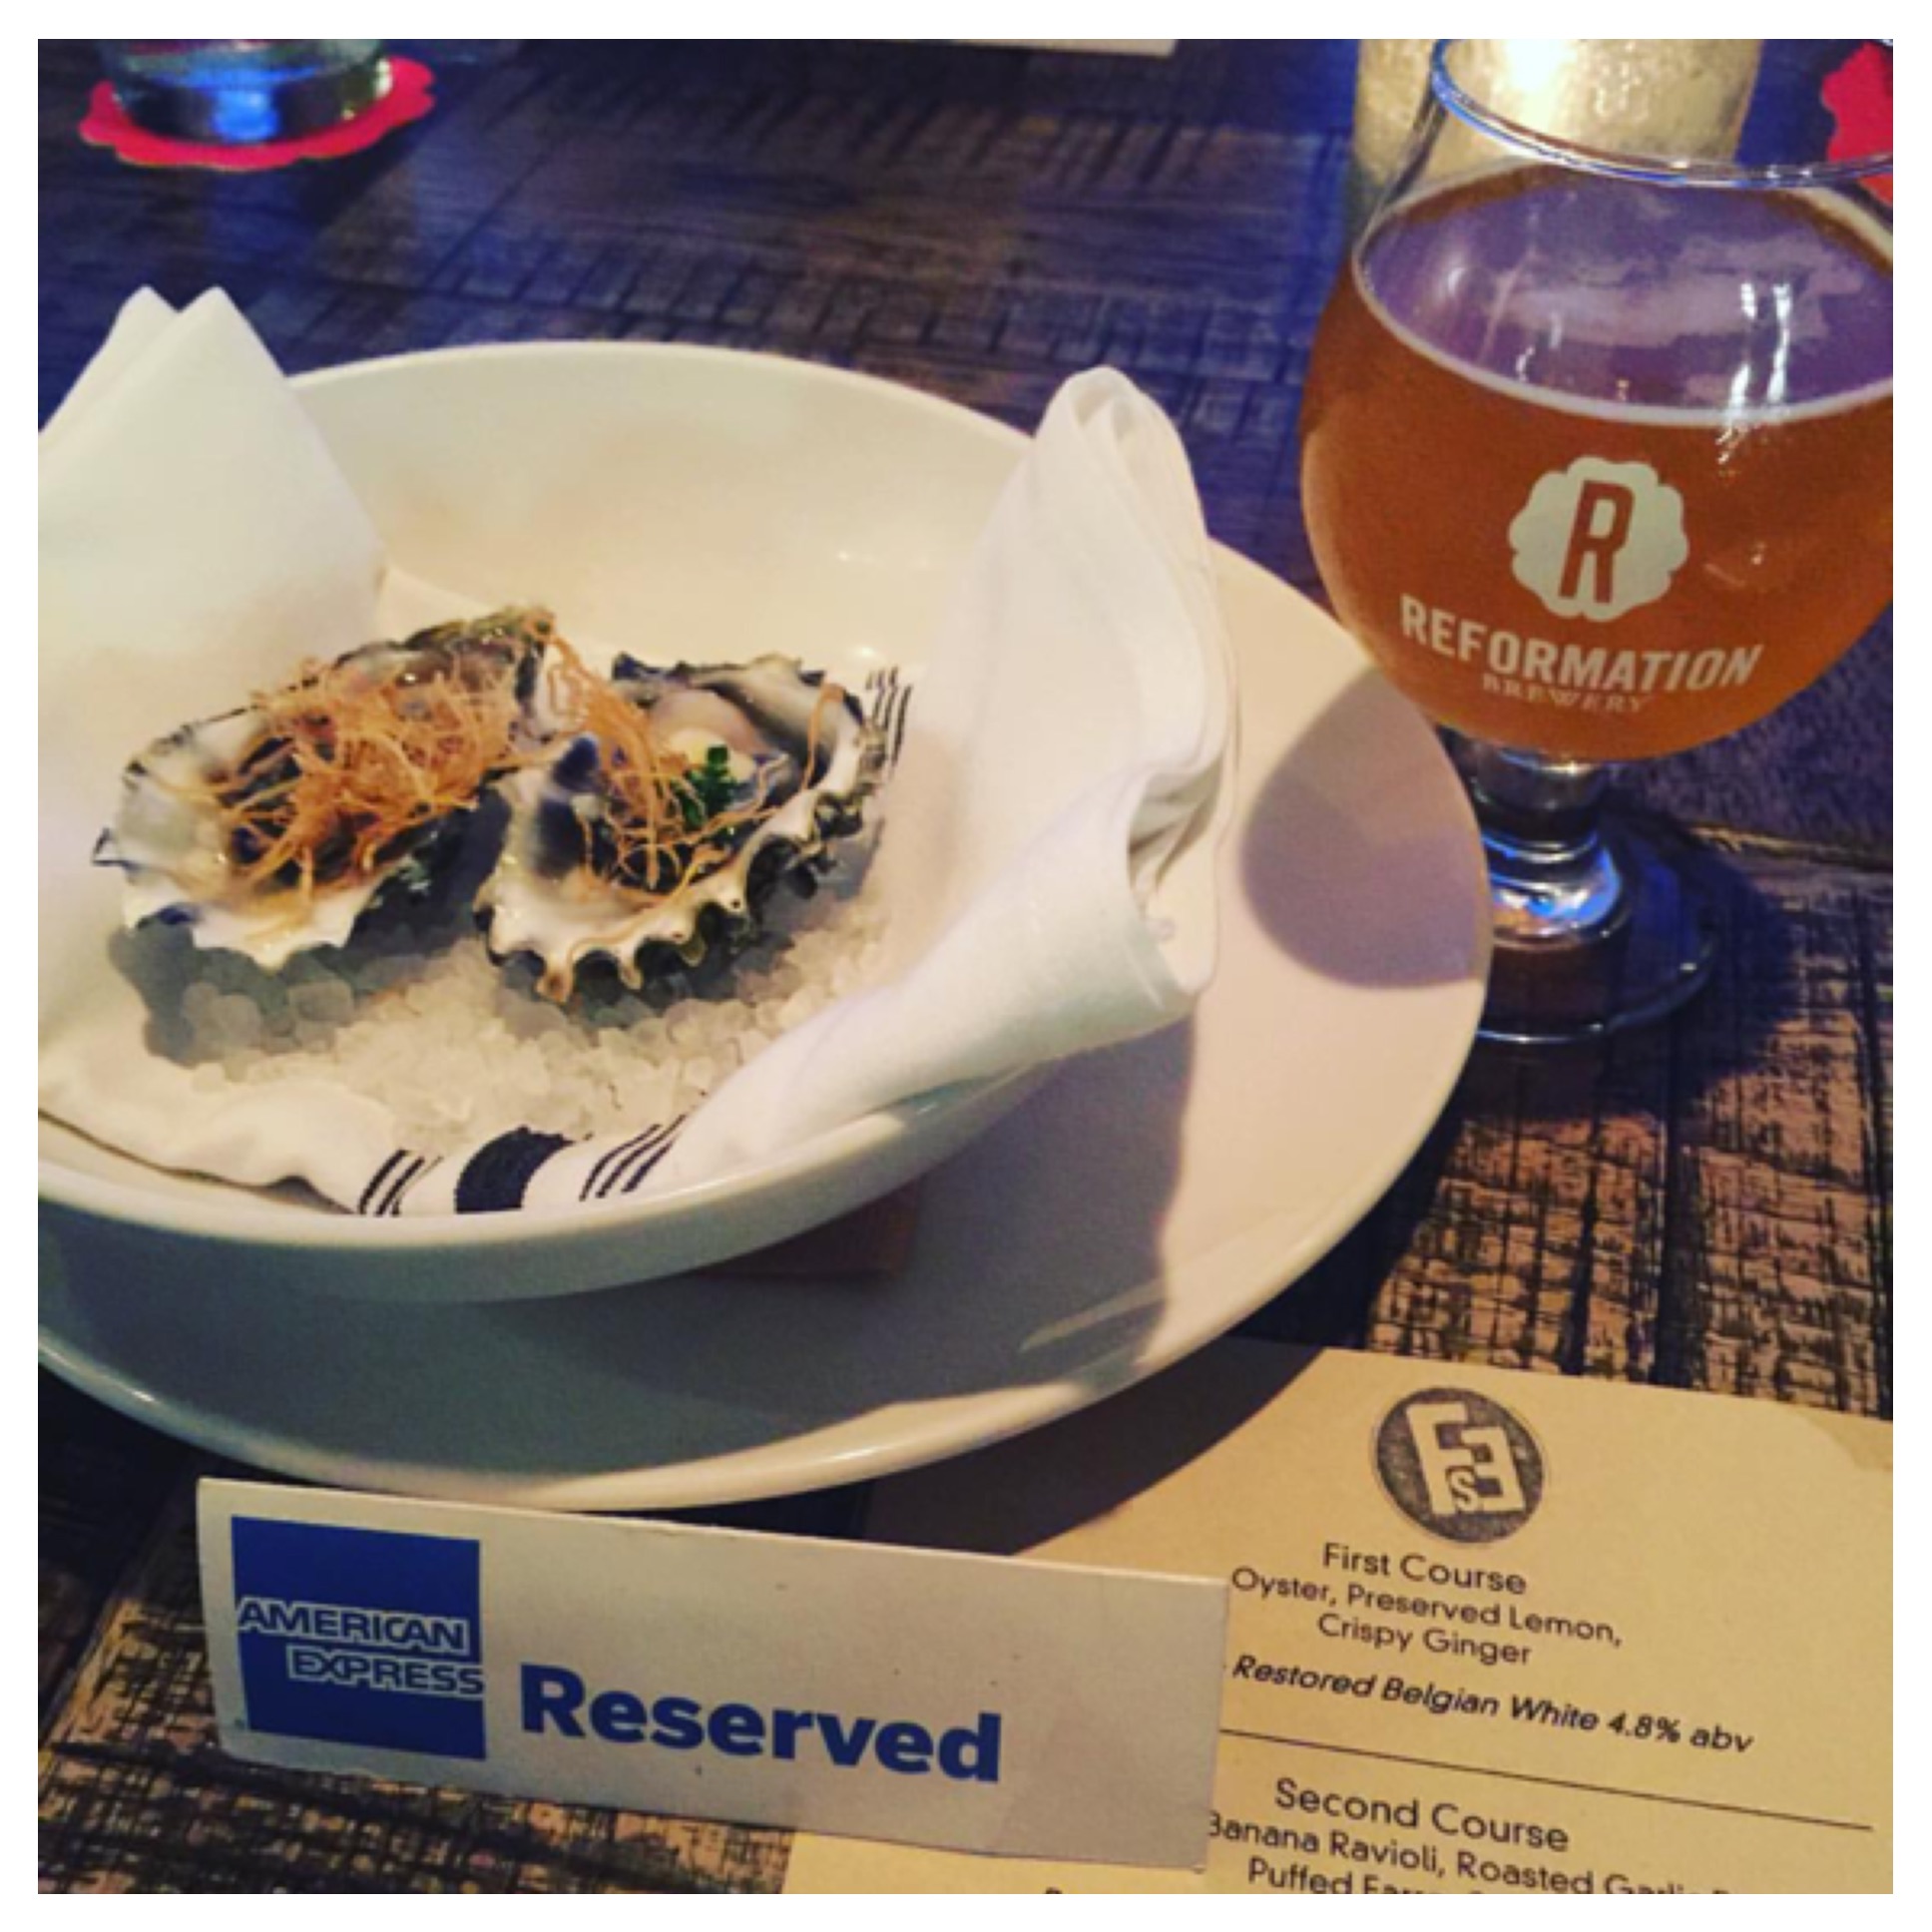 Foundation Social Eatery’s Beer Dinner In Collaboration With Reformation Brewery